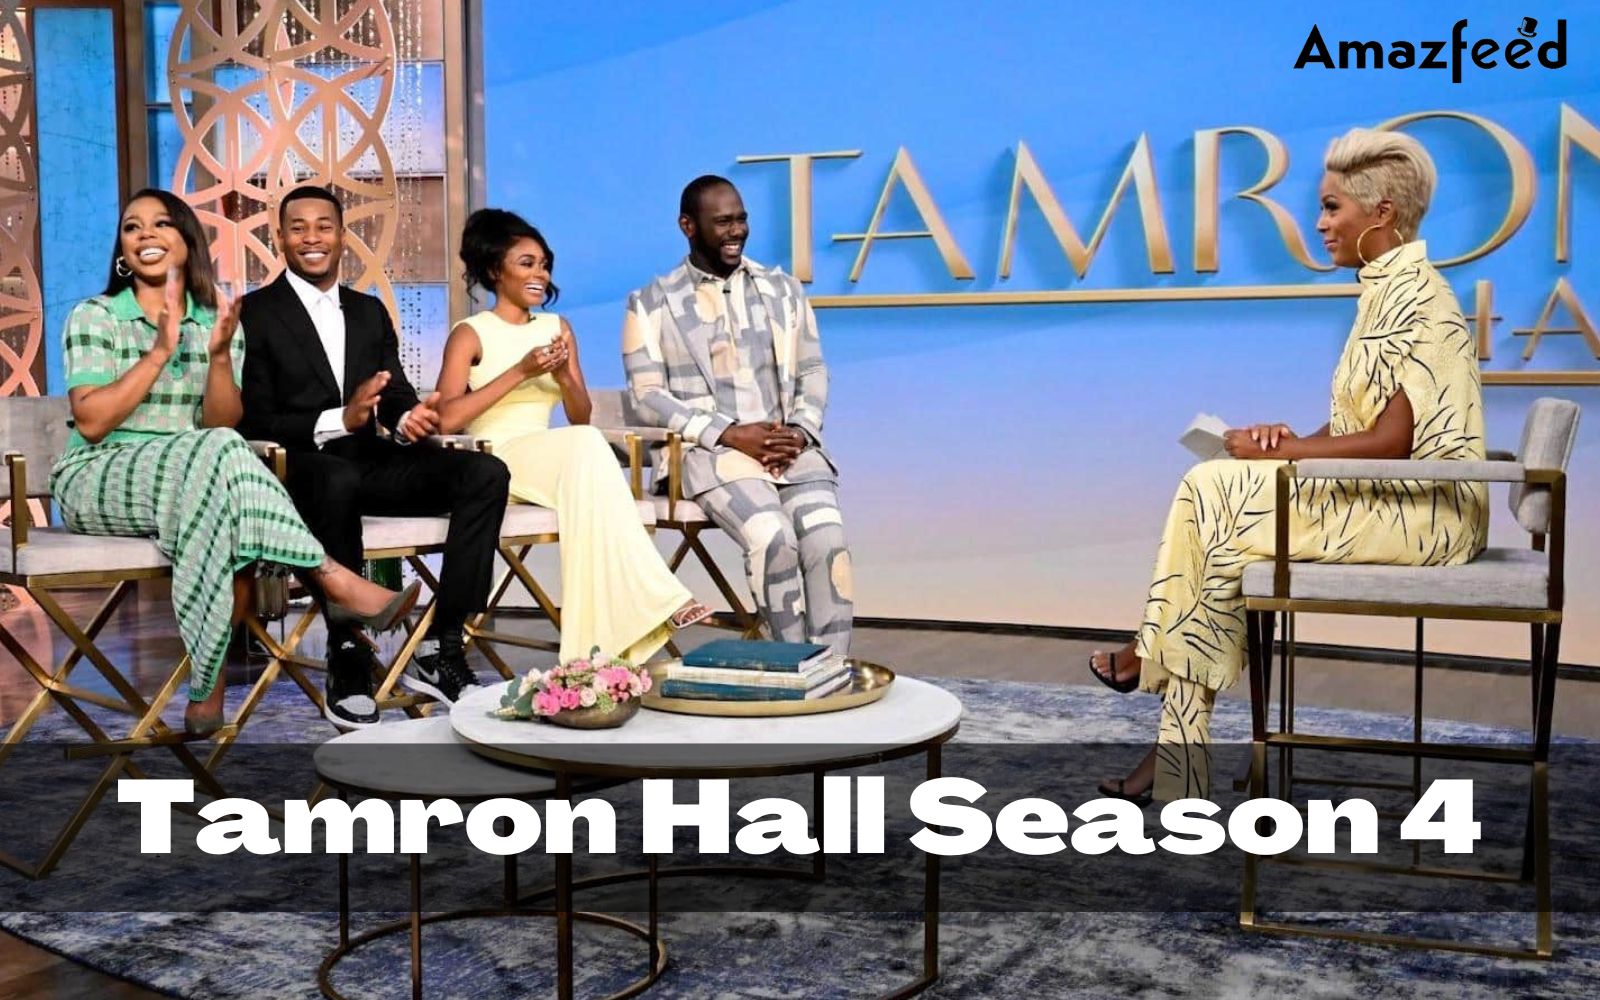 Tamron Hall season 4 - Release date, spoiler, Storyline, new season trailer, and everything you need to know